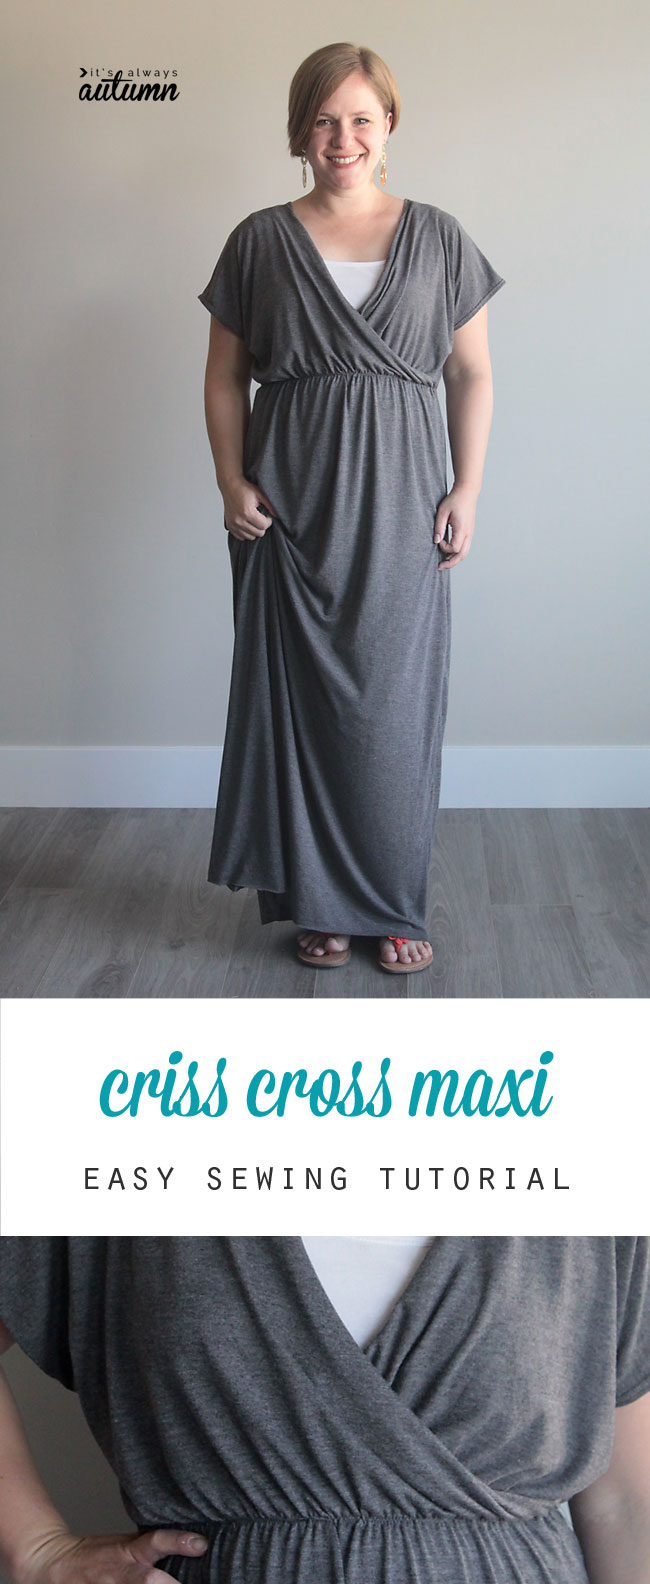 A person standing posing for the camera, wearing a grey maxi dress with a criss cross bodice